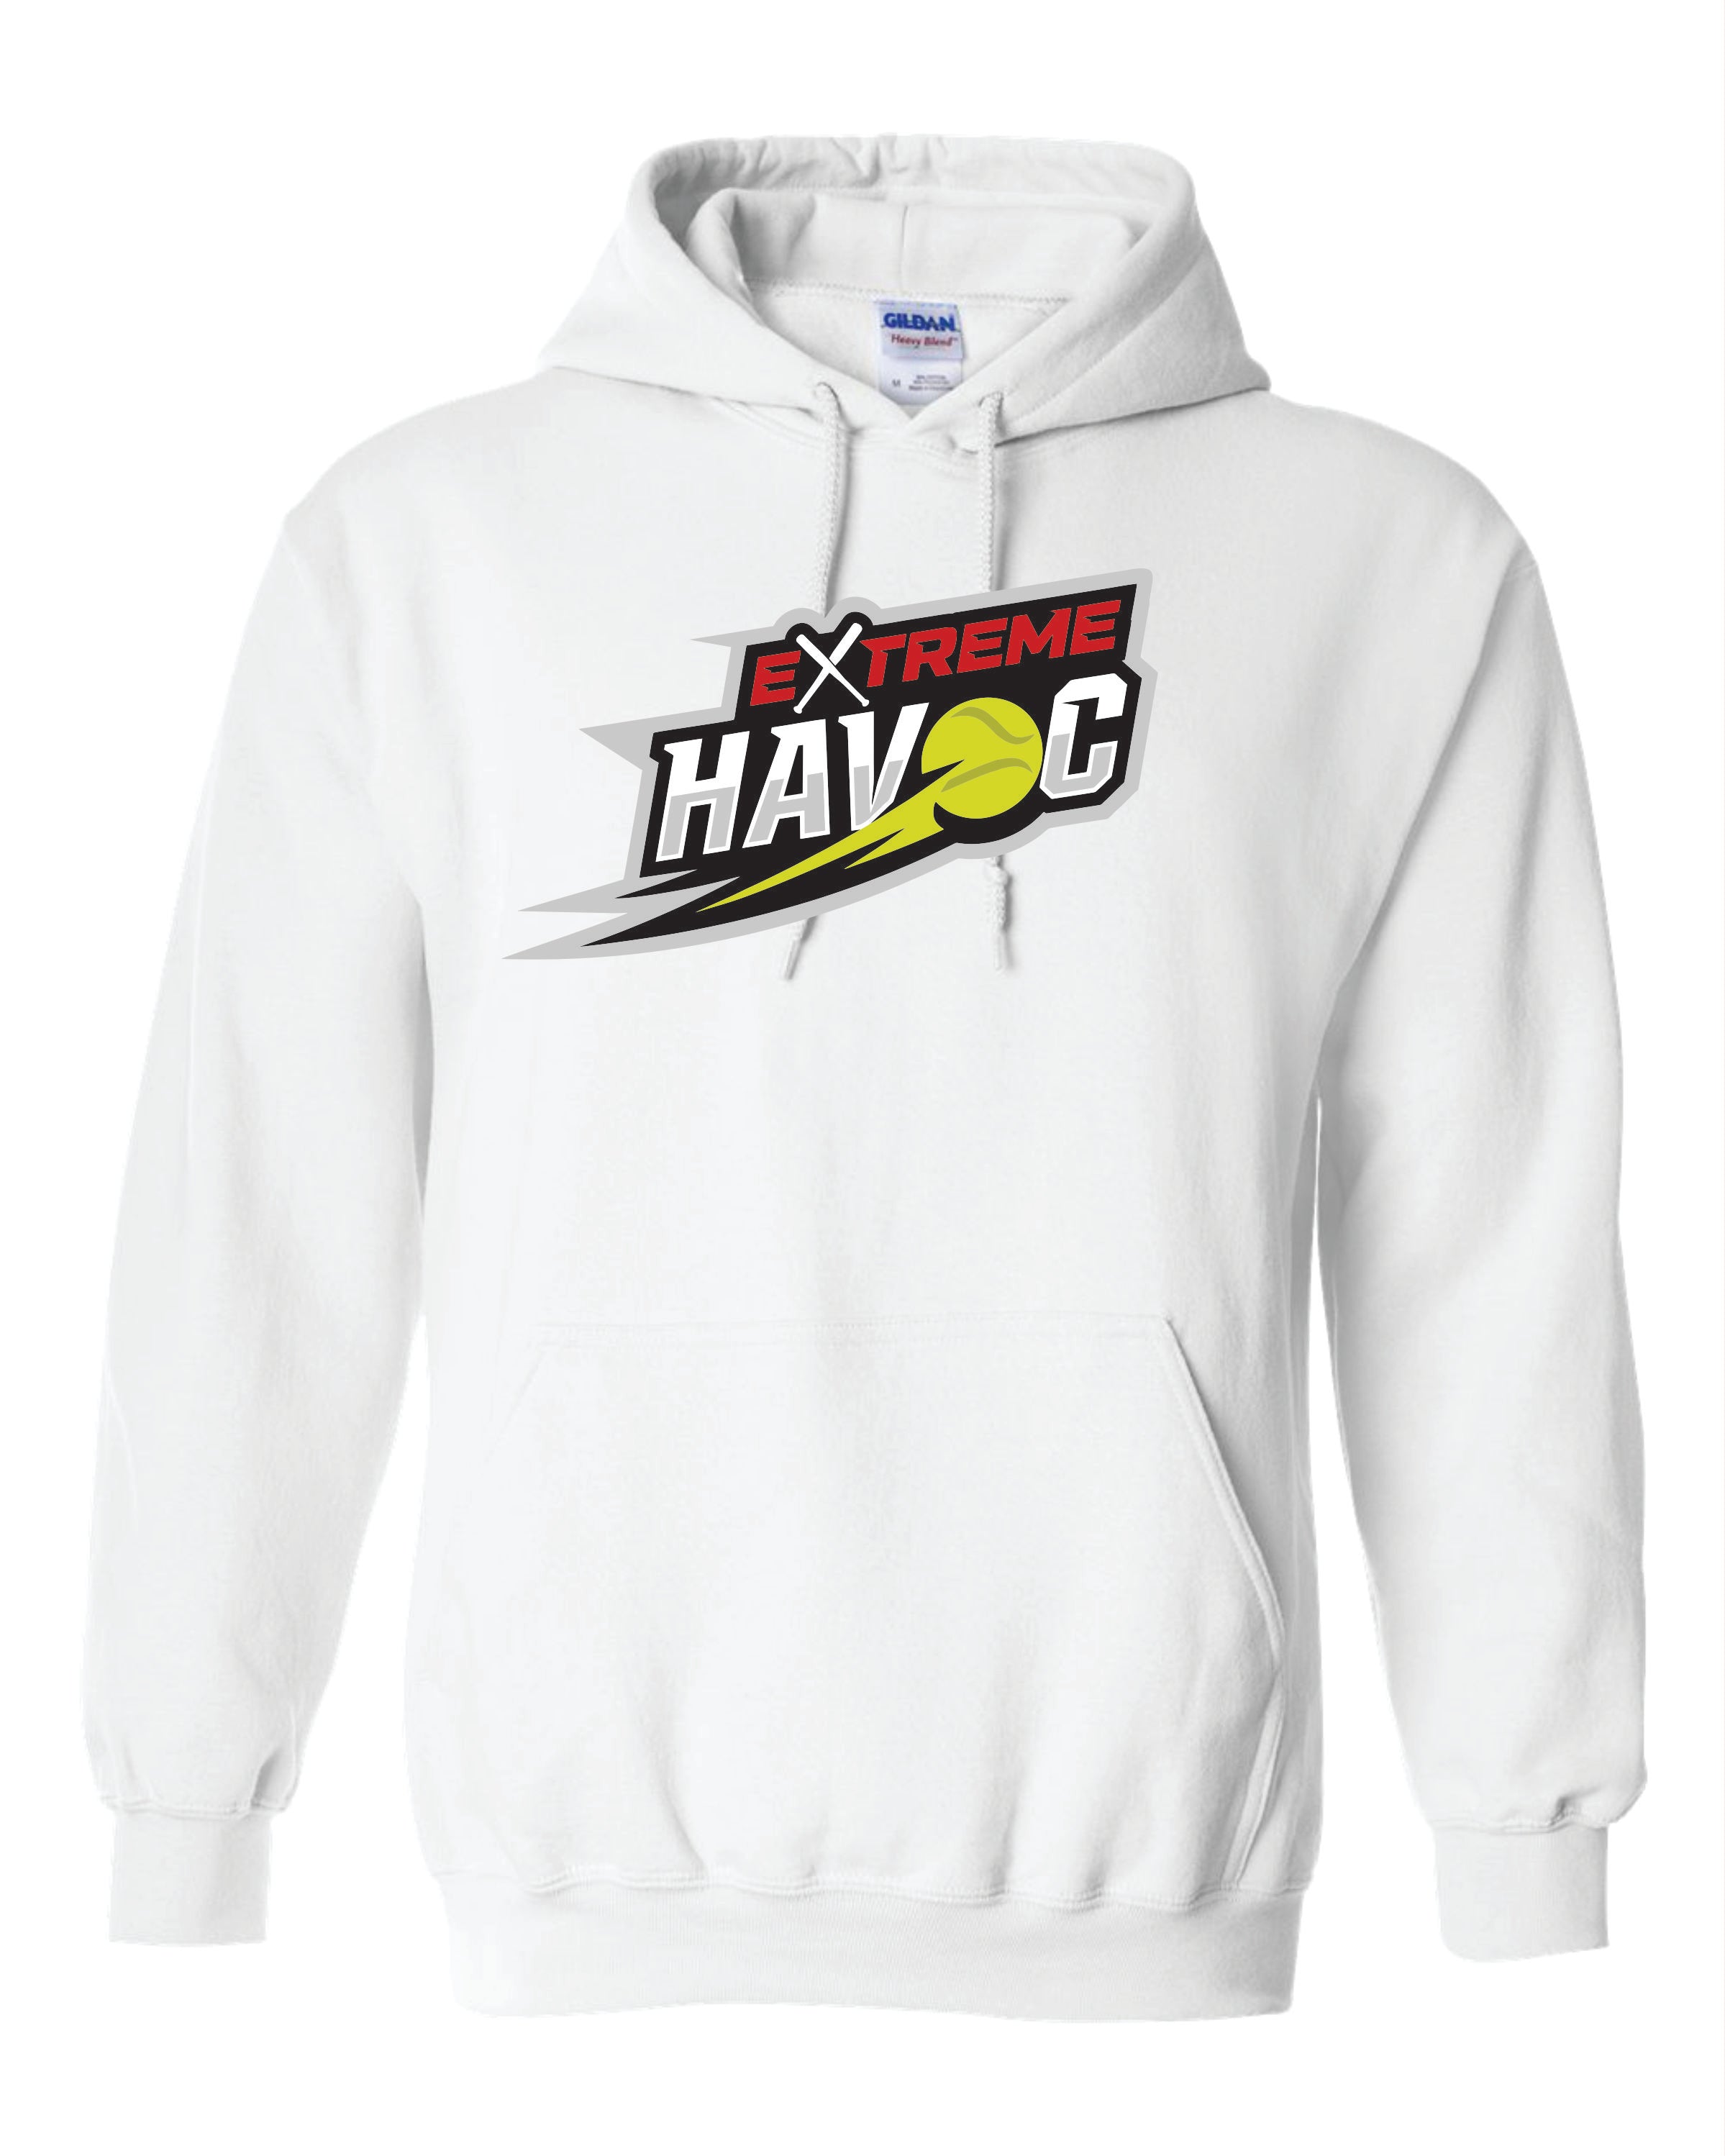 Havoc Cotton/poly 50/50 blend Hoodie YOUTH